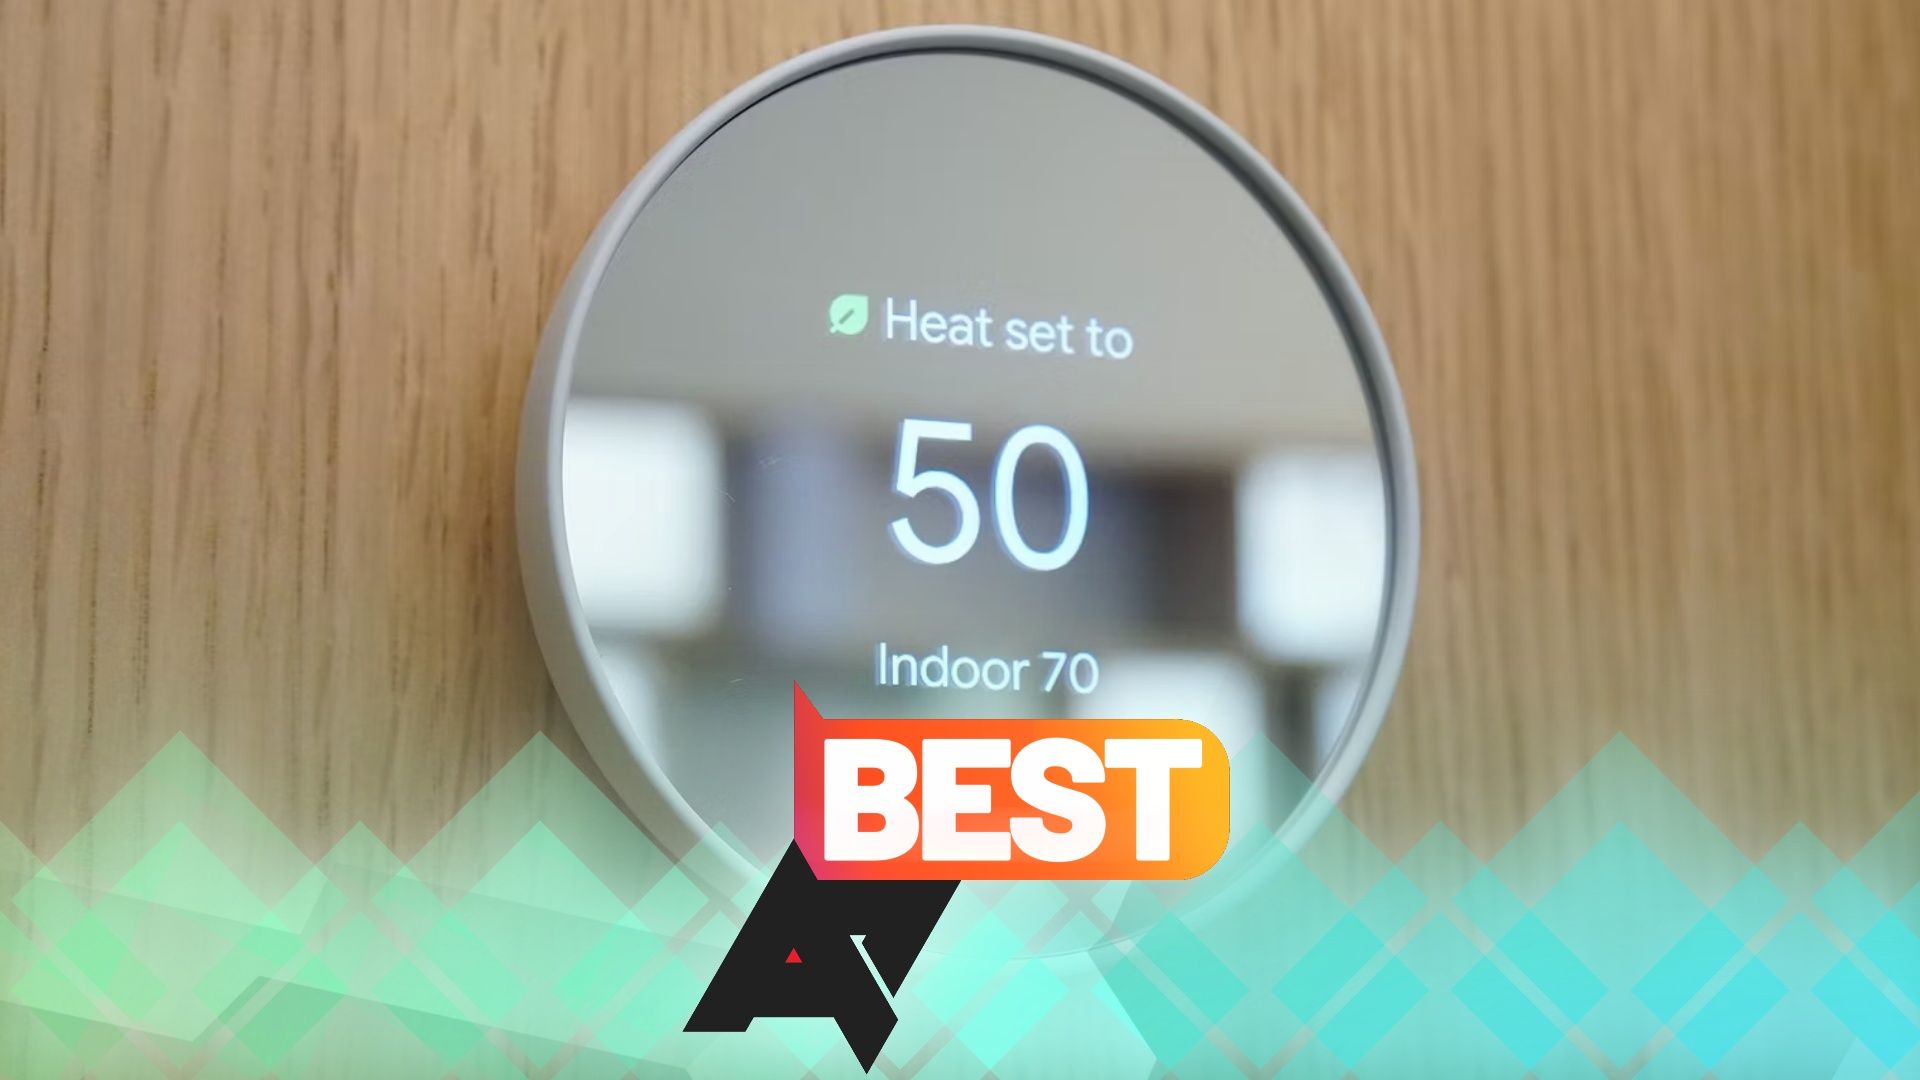 A photo of a Google Nest smart thermostat showing a temperature of 50 degrees, mounted on a wall, with an AP Best logo below it